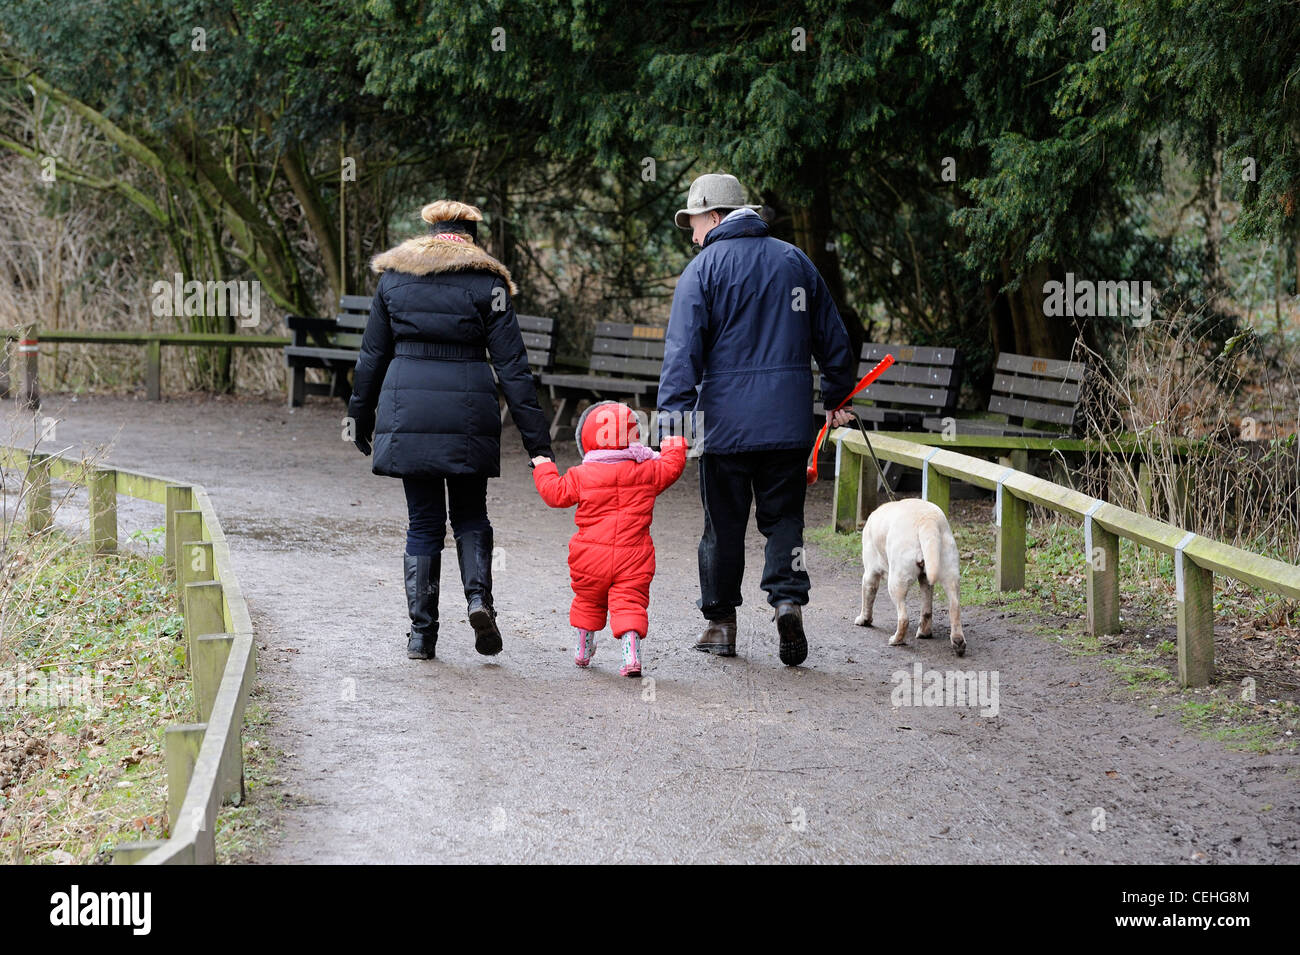 a family walking through rufford country park nottinghamshire england uk Stock Photo